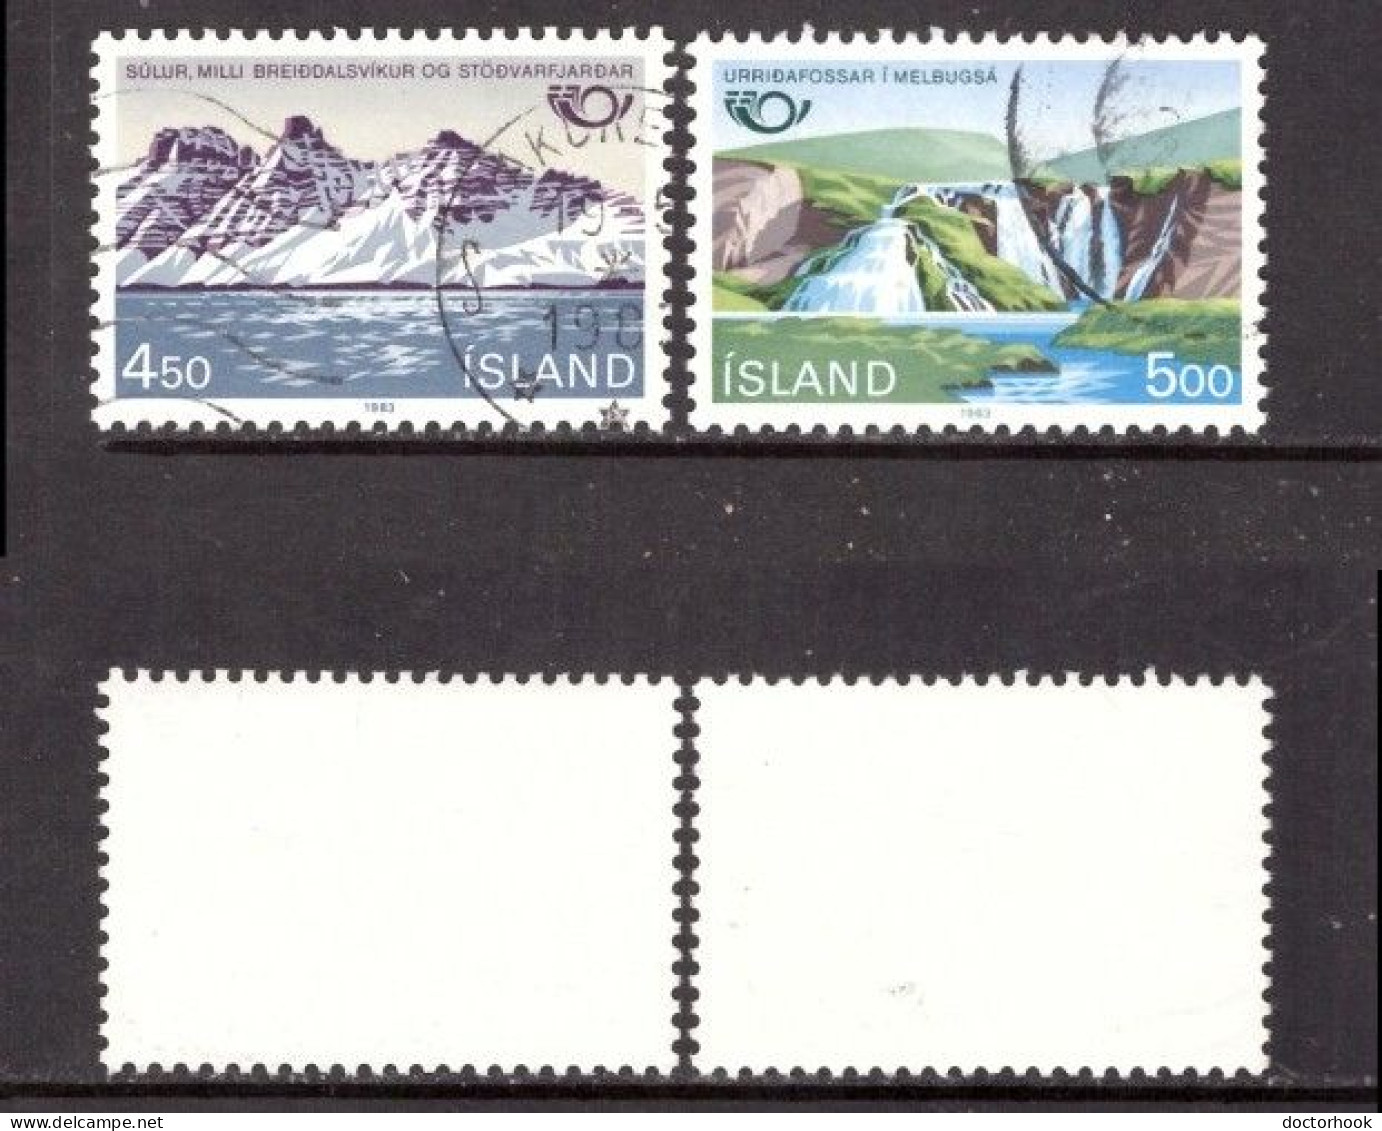 ICELAND   Scott # 571-2 USED (CONDITION AS PER SCAN) (Stamp Scan # 965-8) - Oblitérés